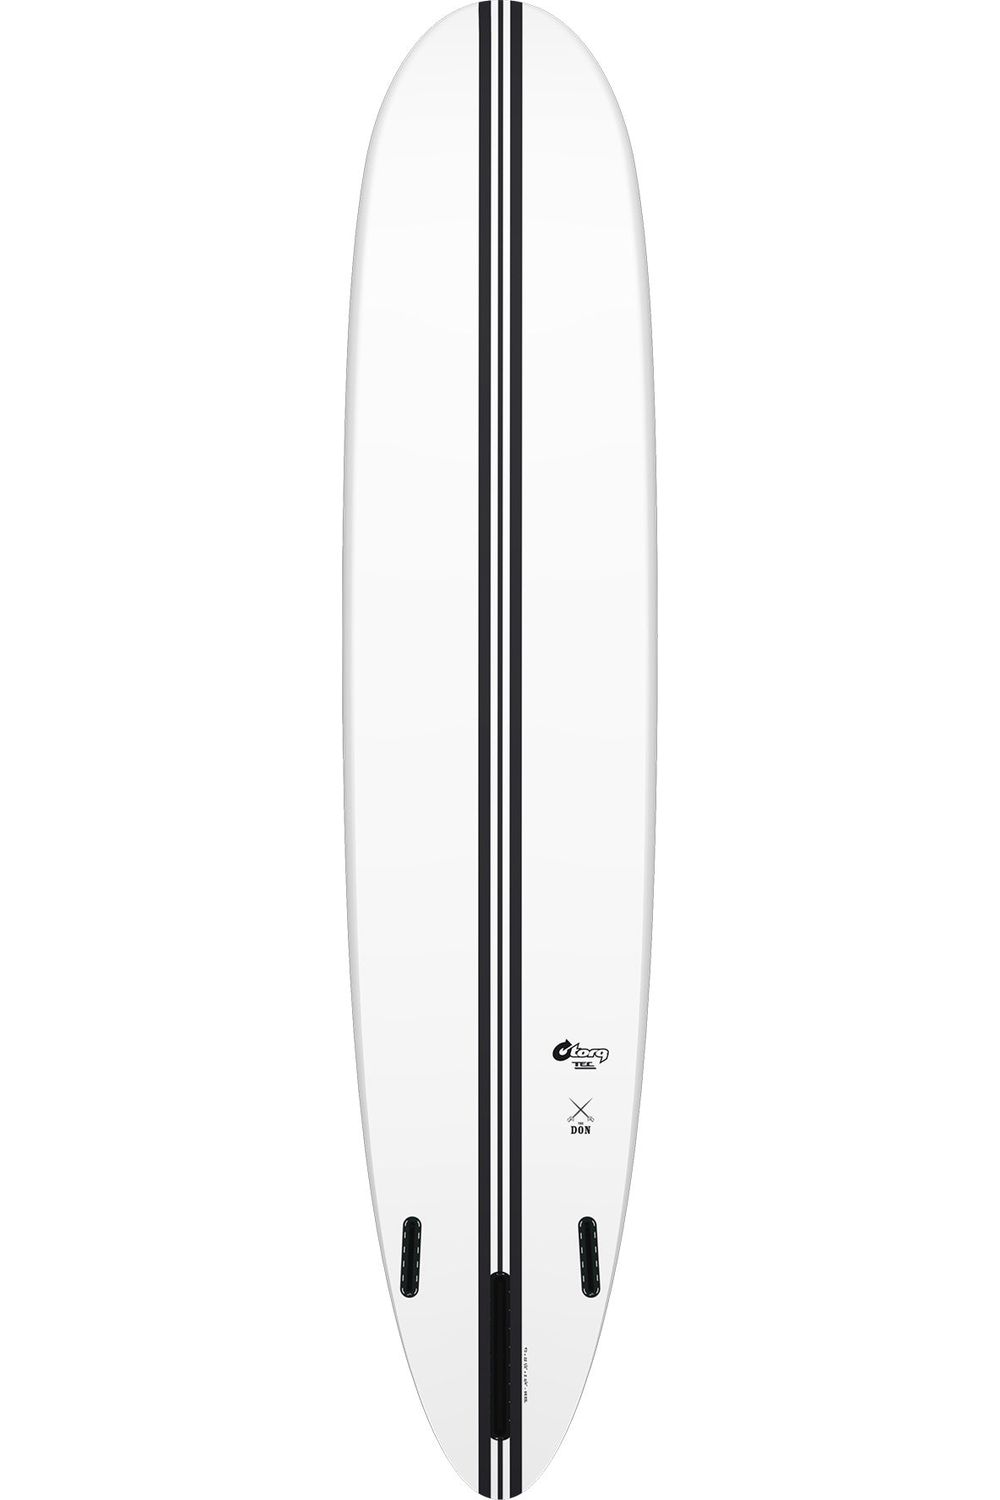 Torq TEC Surfboard: The Don in White